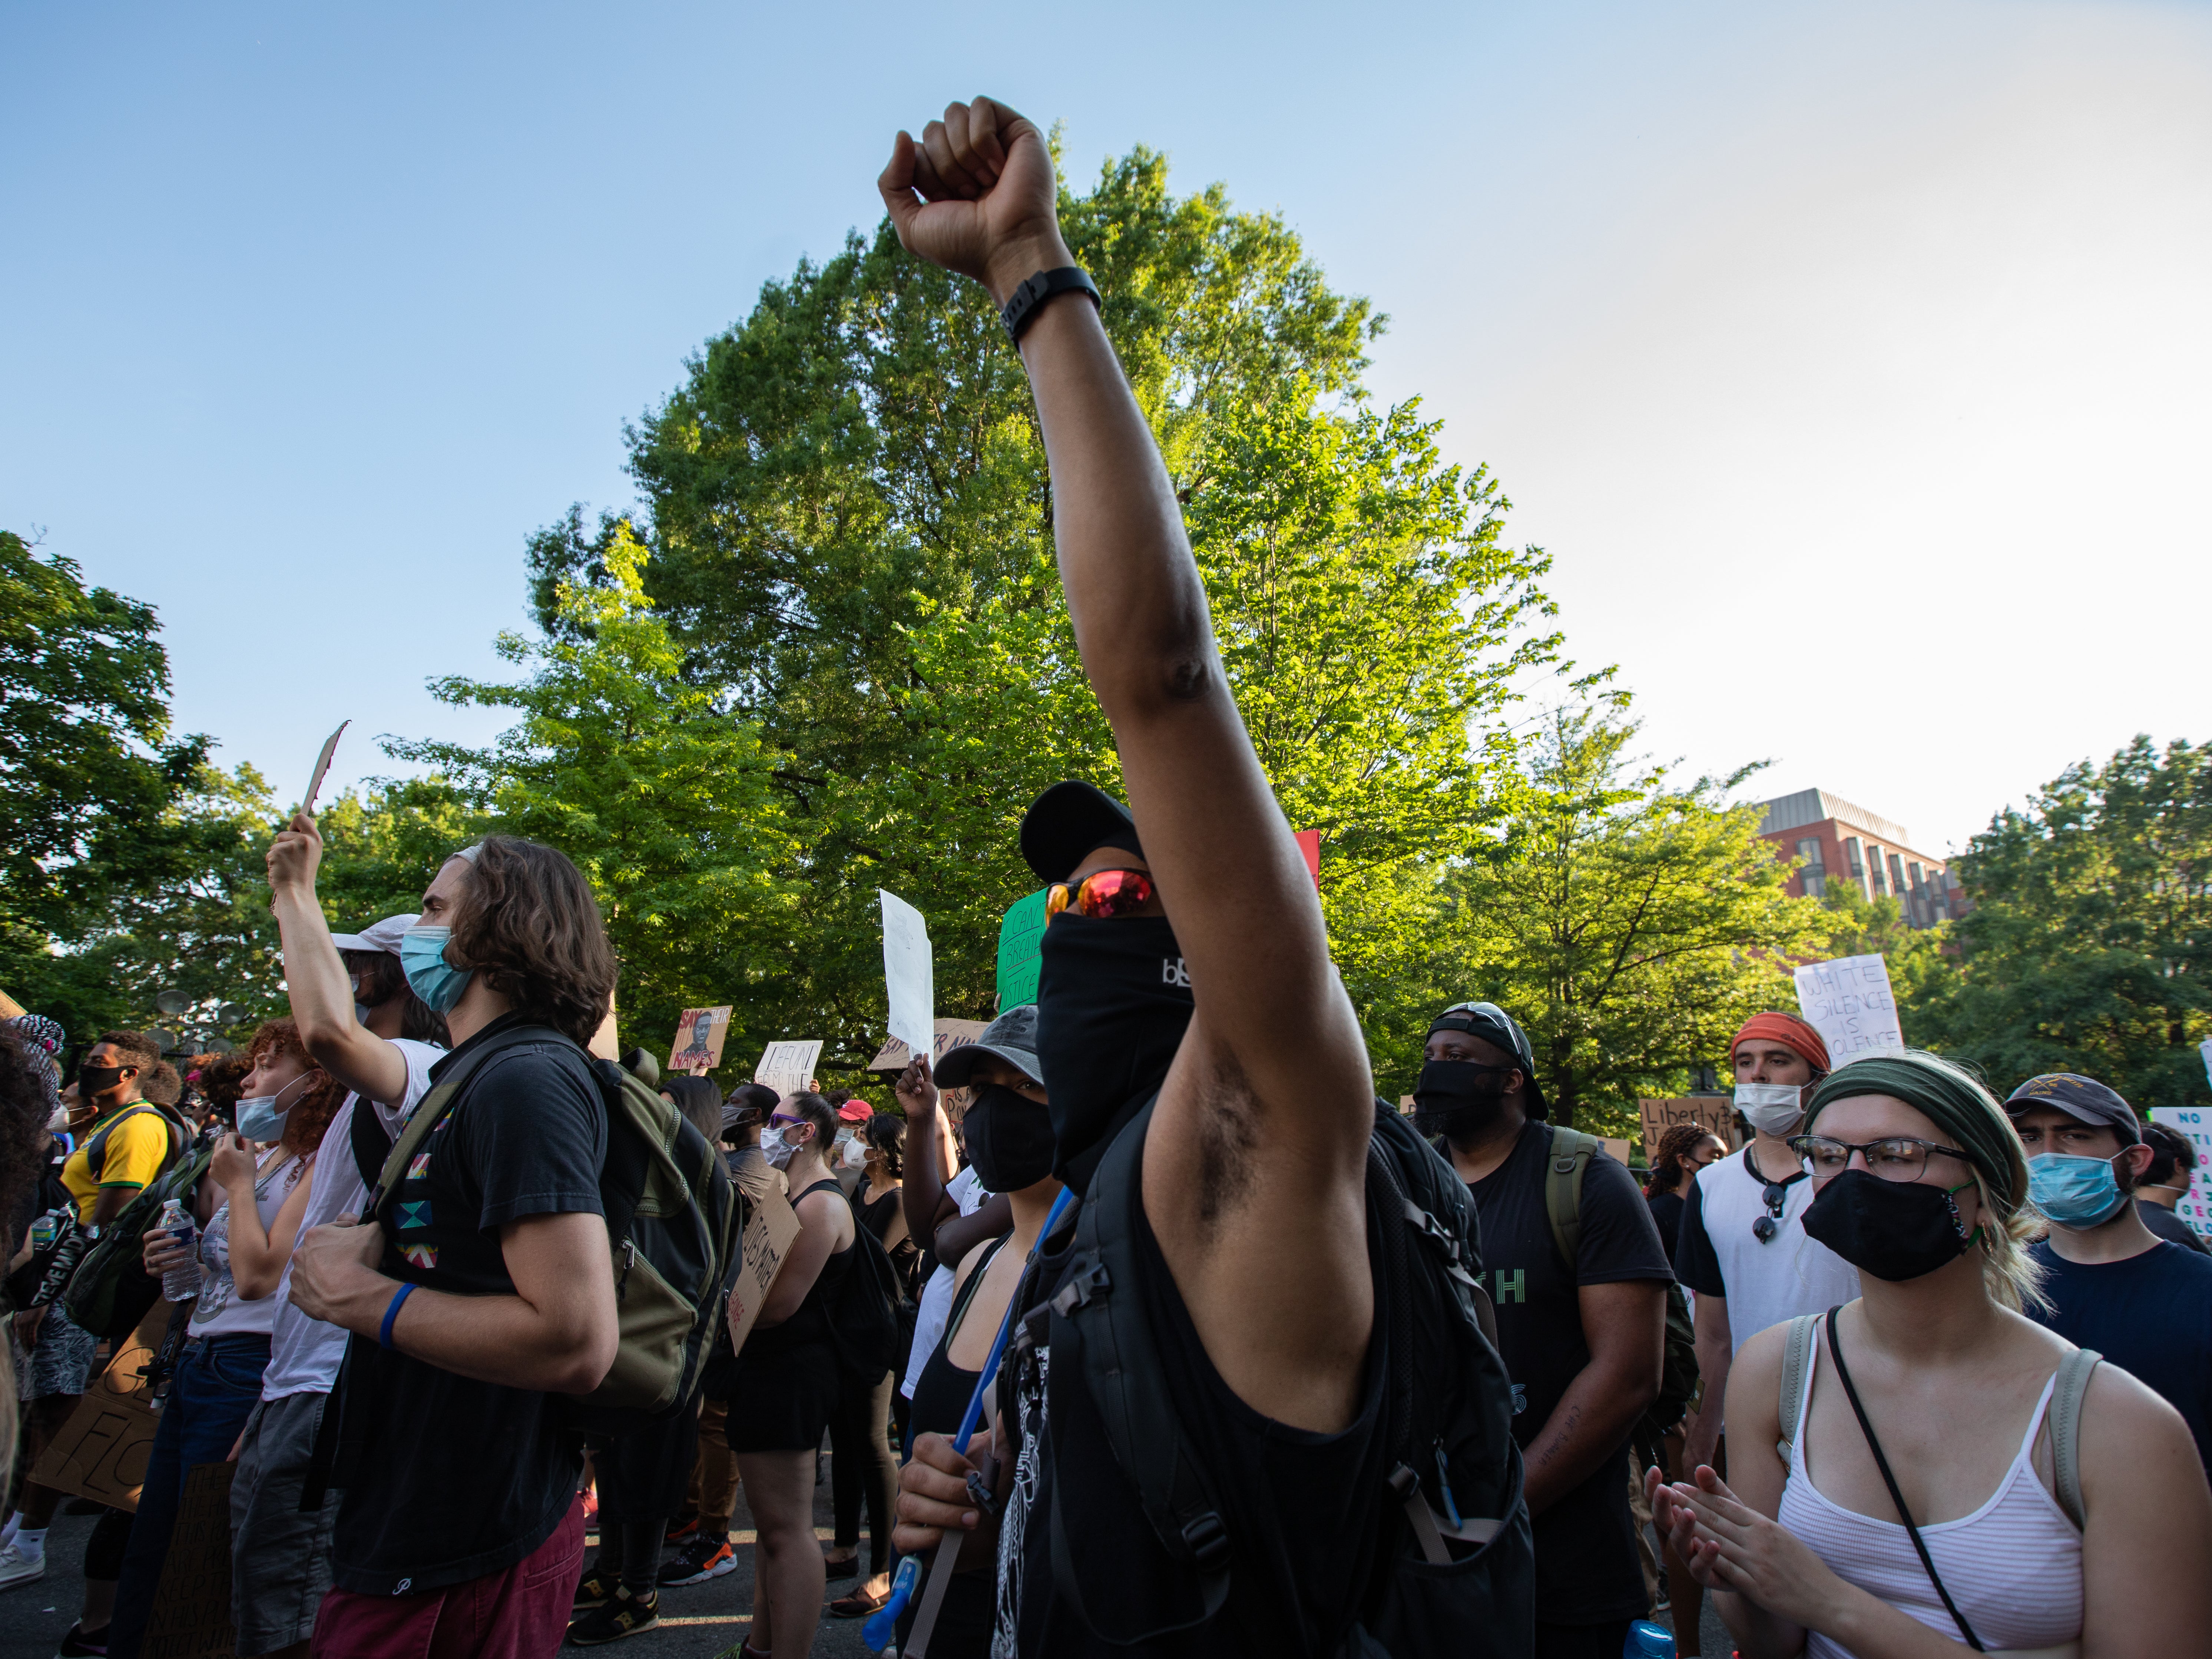 Demonstrators and police face off in Washington, D.C., on the sixth consecutive day of protests over the death of George Floyd.